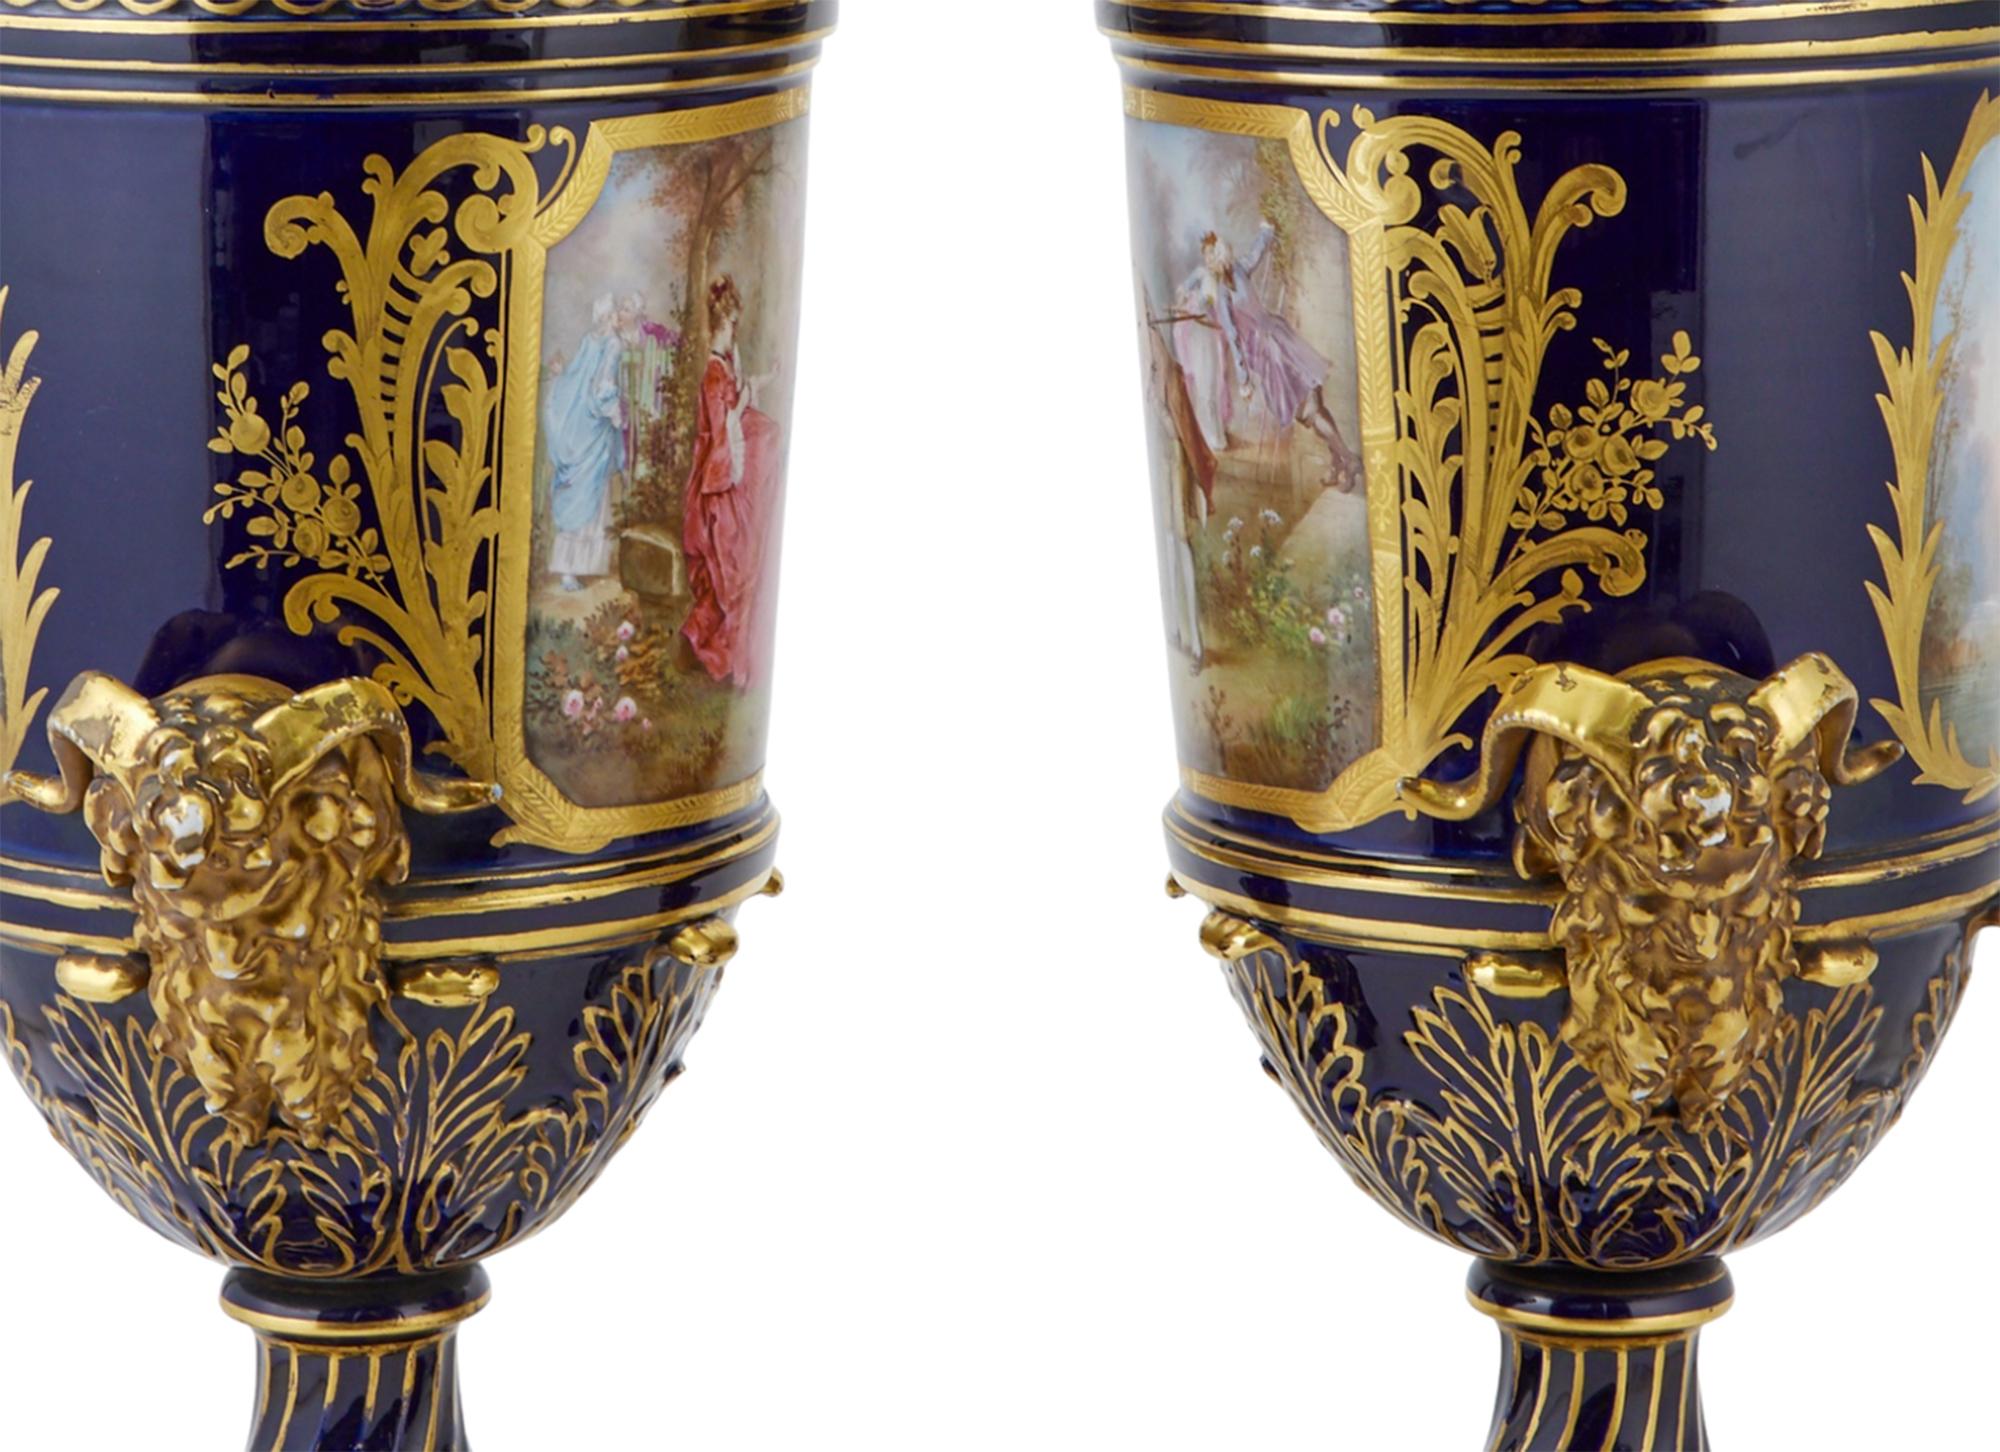 Pair of Sevres Style Gilt and Polychrome Decorated Porcelain Two-Handled Urns For Sale 1